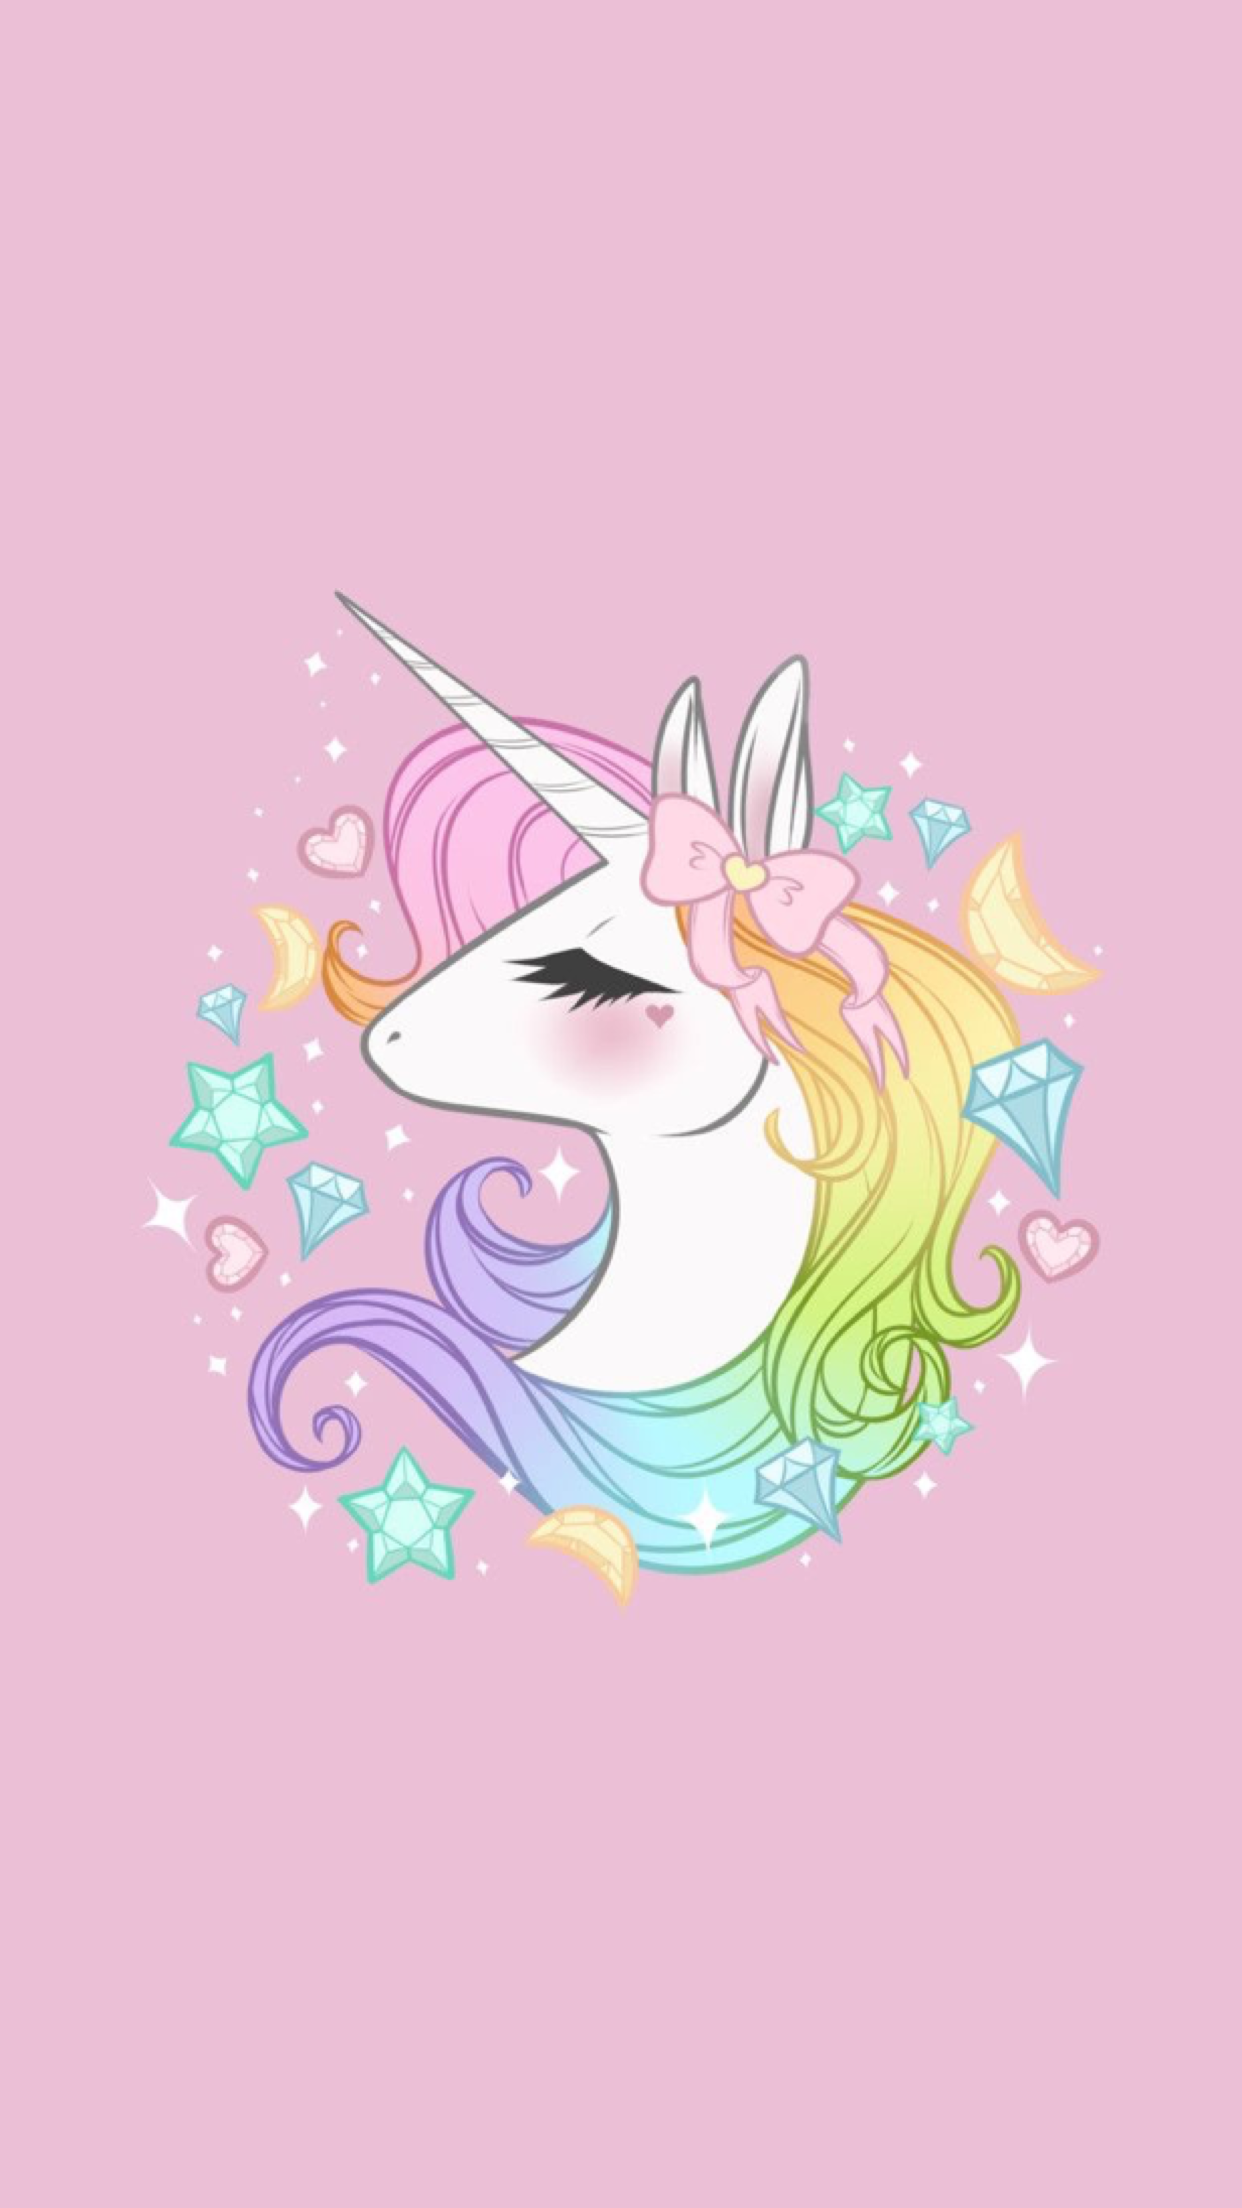 Kawaii Unicorn For Iphone Wallpapers posted by Zoey Mercado